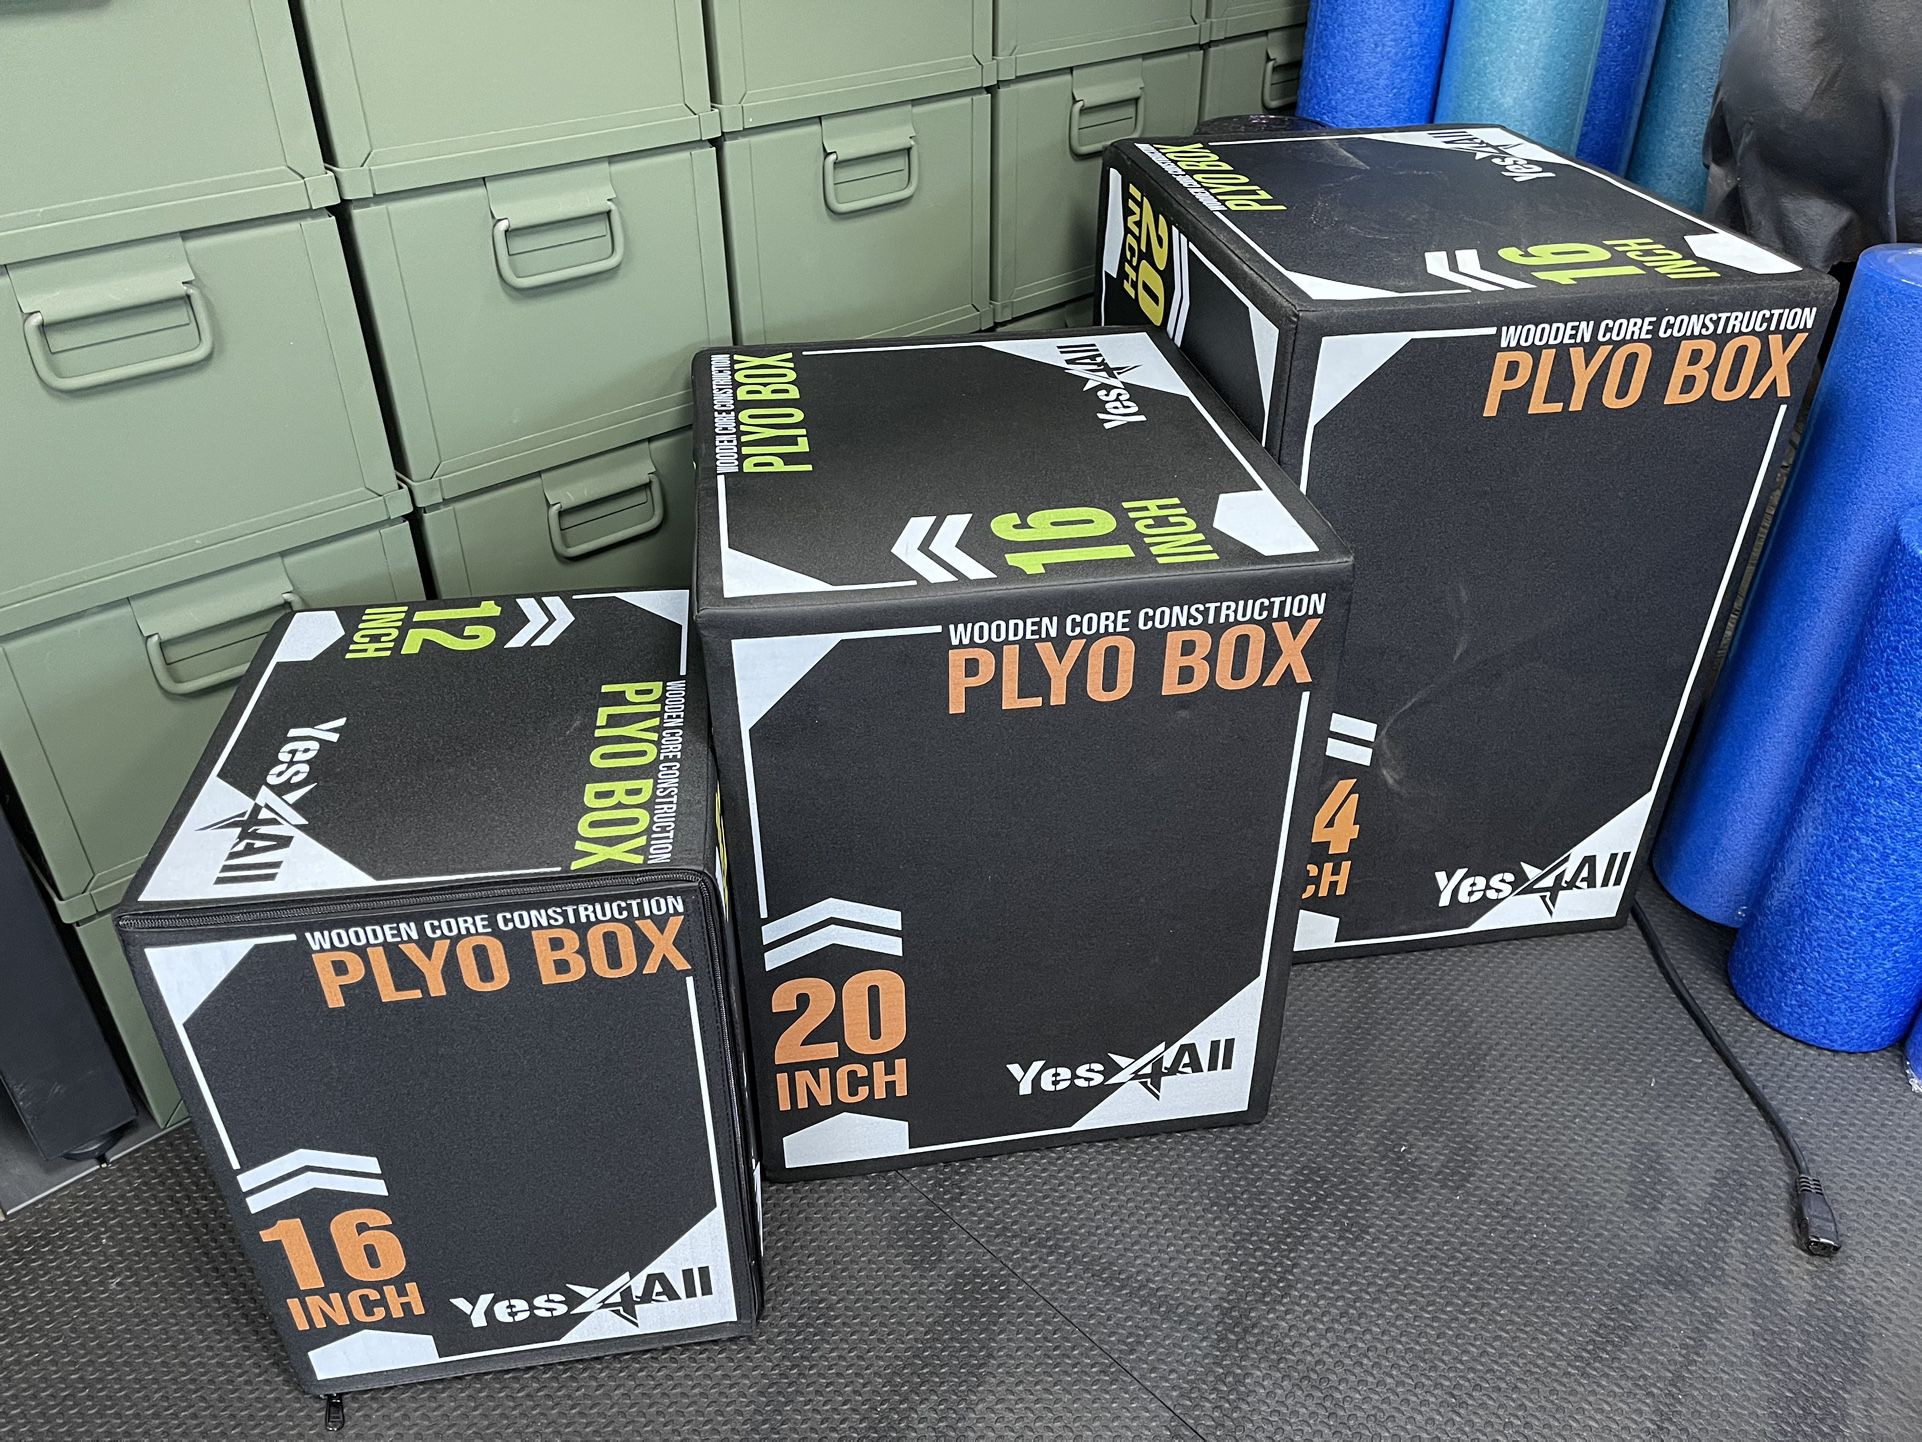 PLYO BOXES🔹SPORTS FITNESS GYM EQUIPMENT 